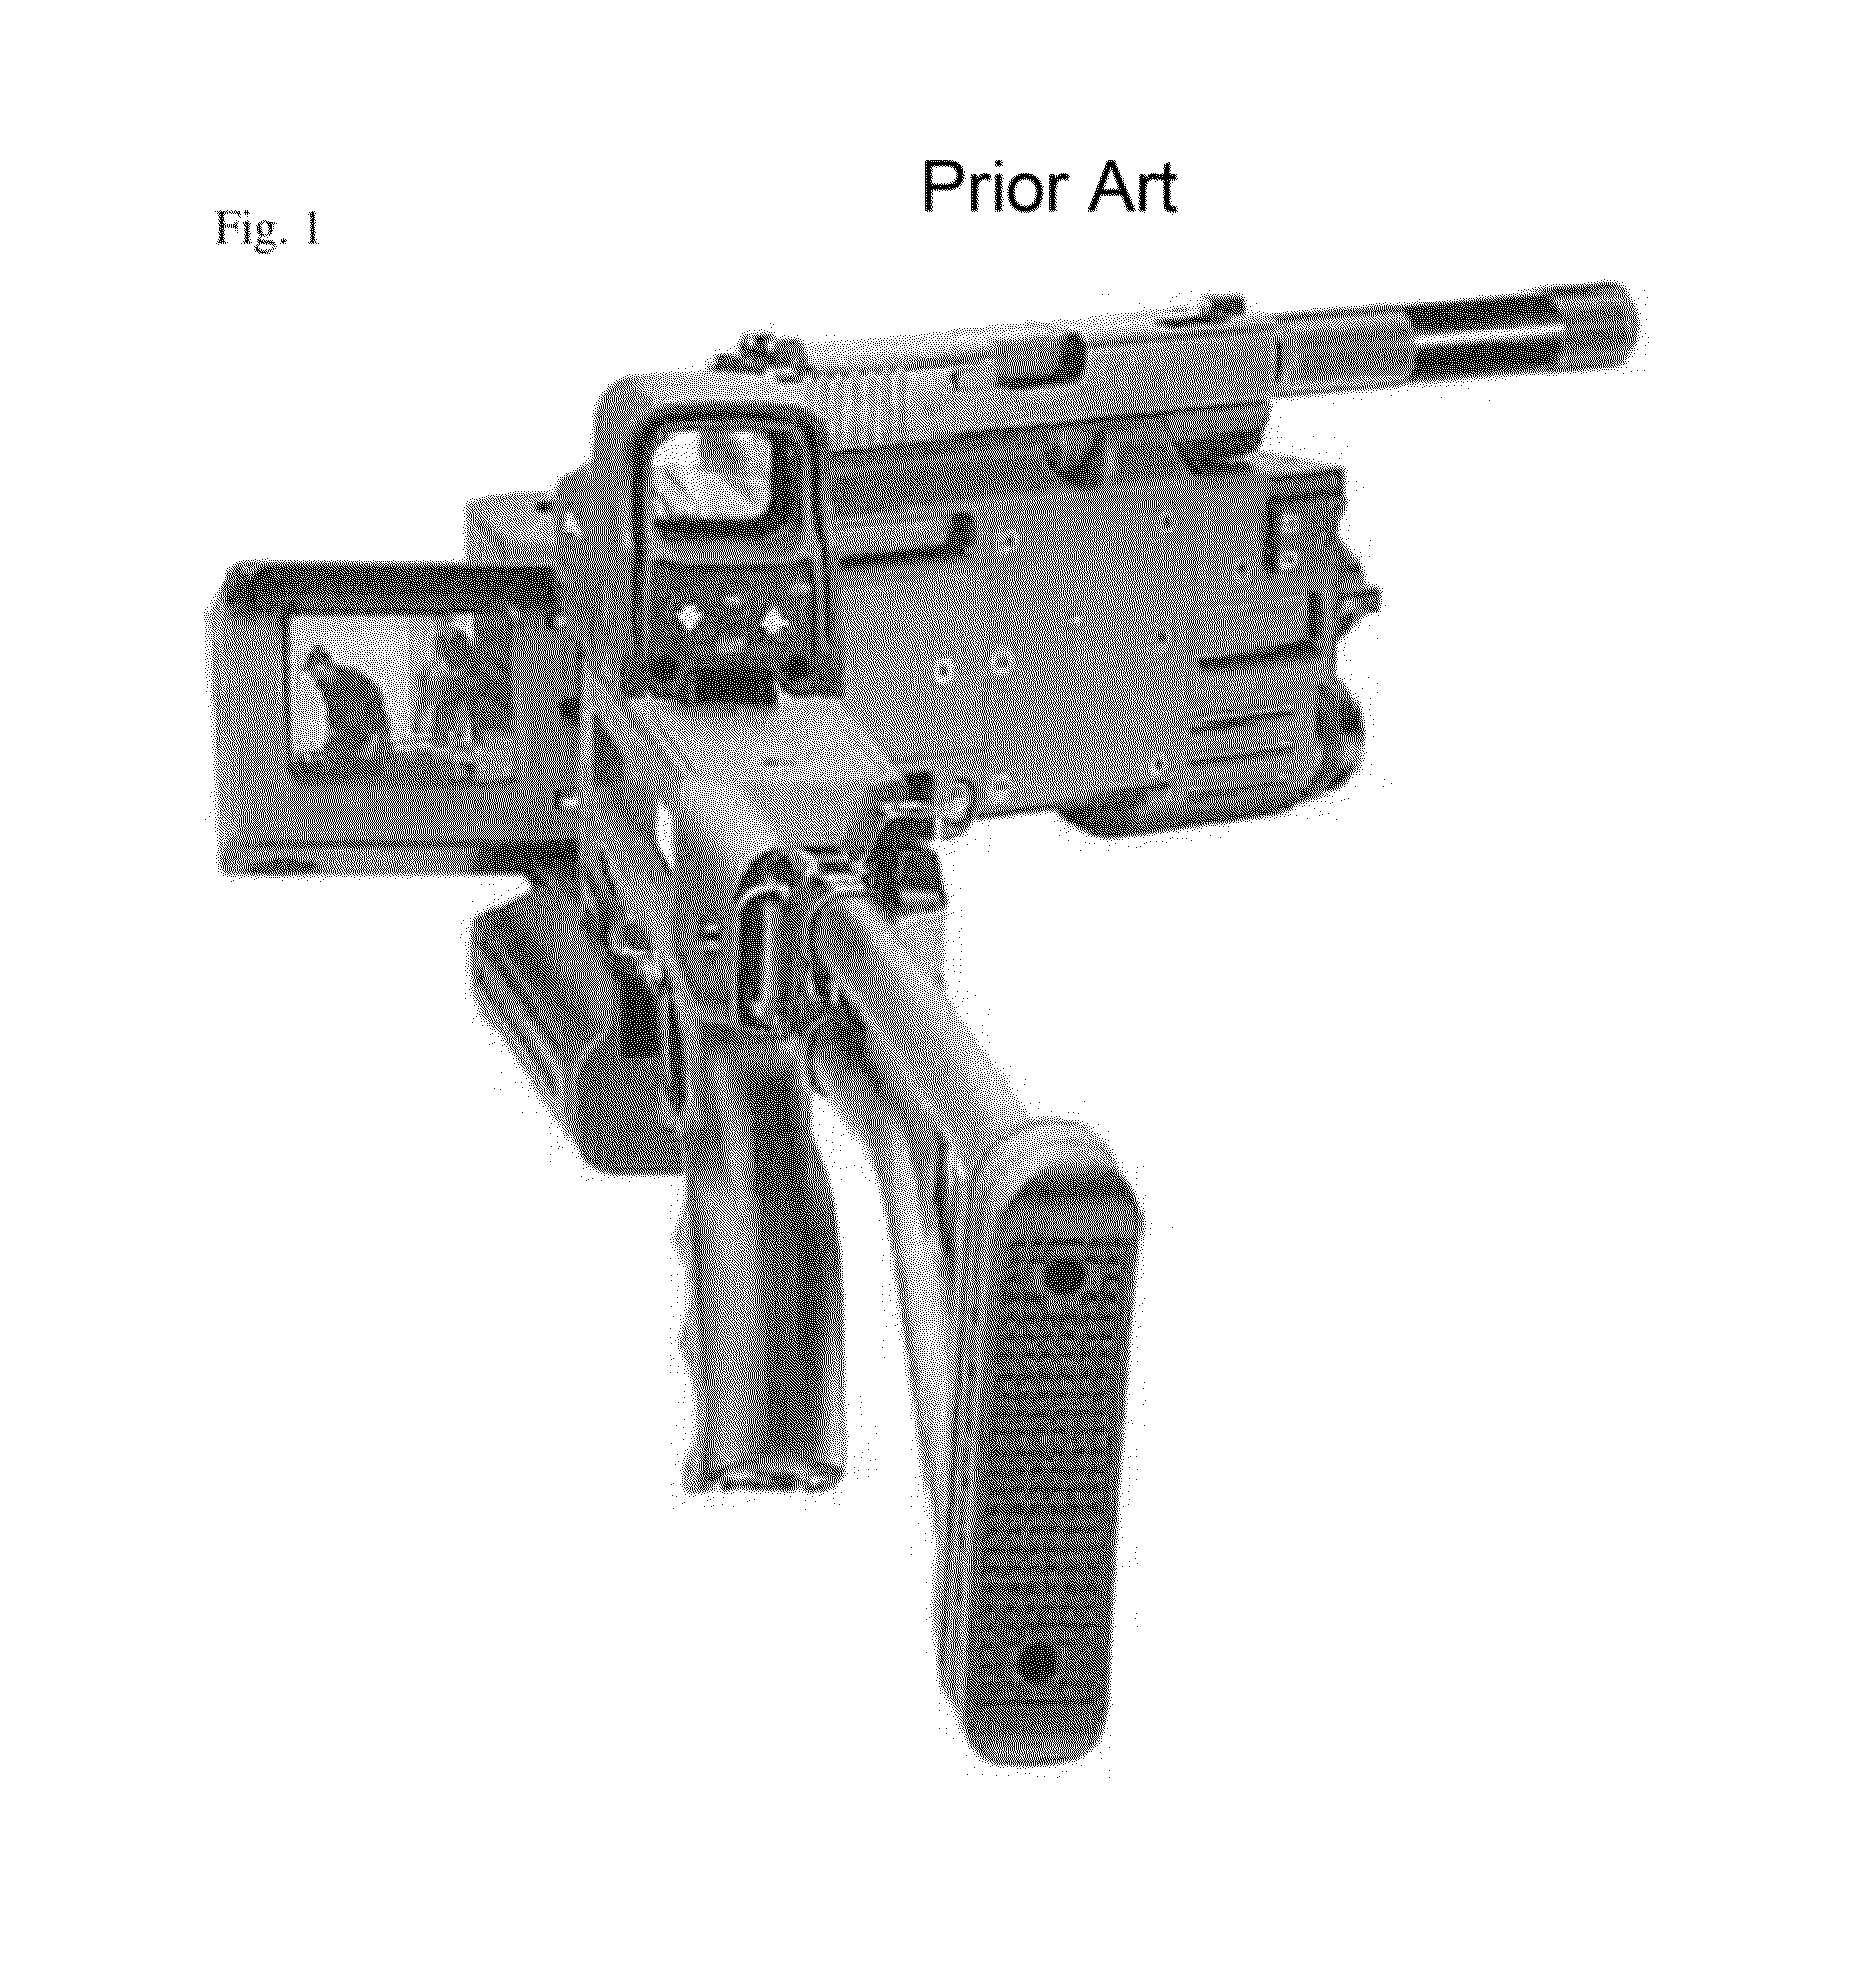 Bendable firearm having off-axis shoulder rest and sight